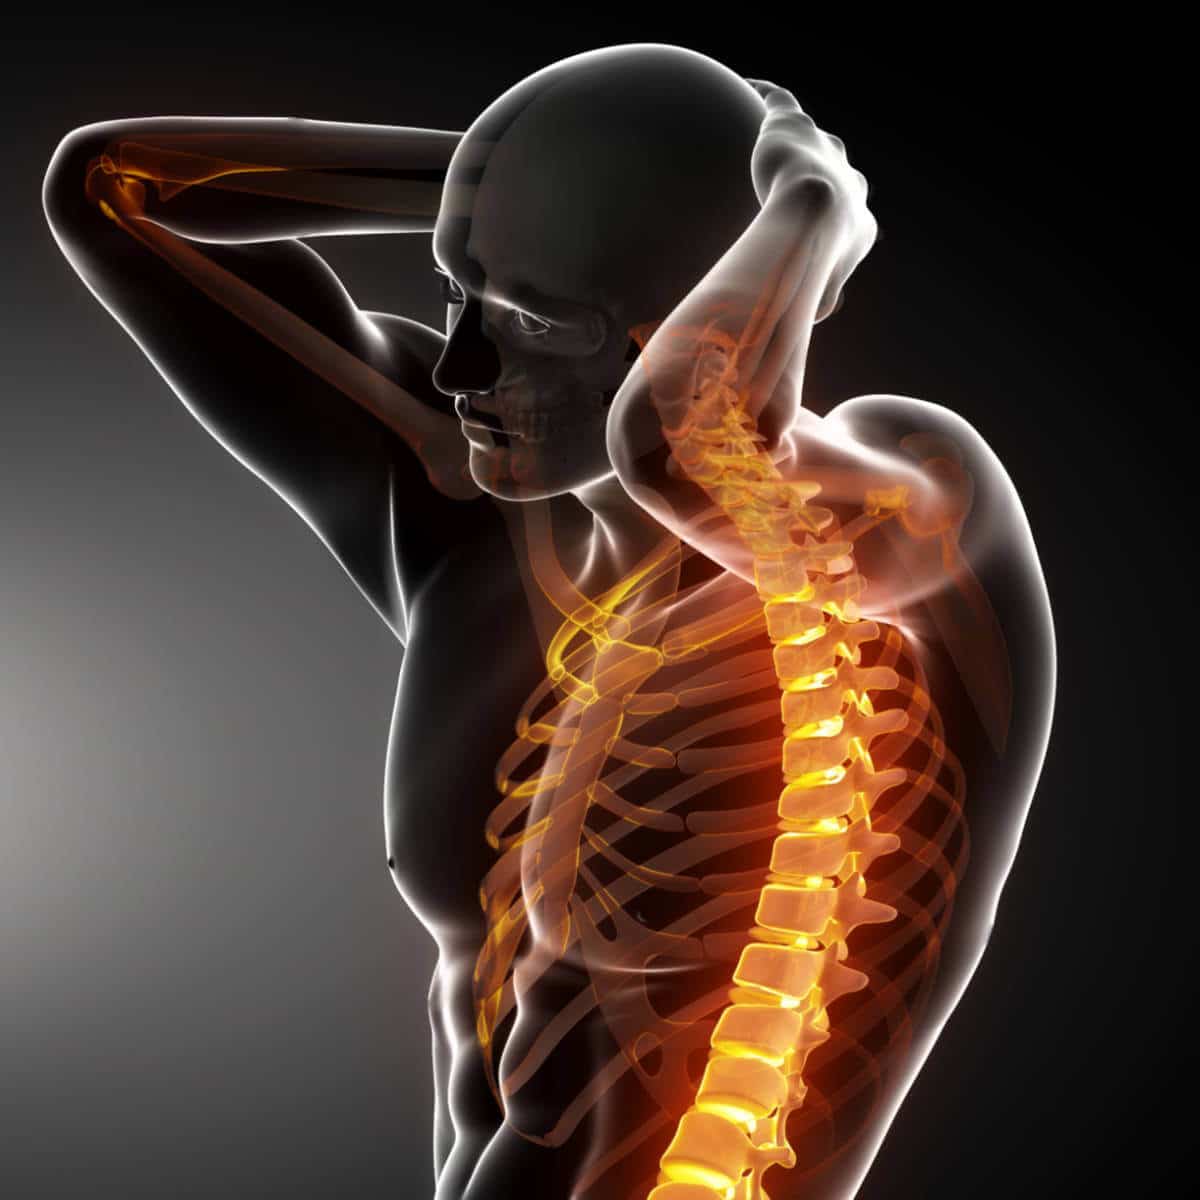 https://physiopretoria.co.za/corpus/content/media/2019/02/Upper-back-pain-Treatment-for-painful-Upper-back-and-spine-GoogFI.jpg